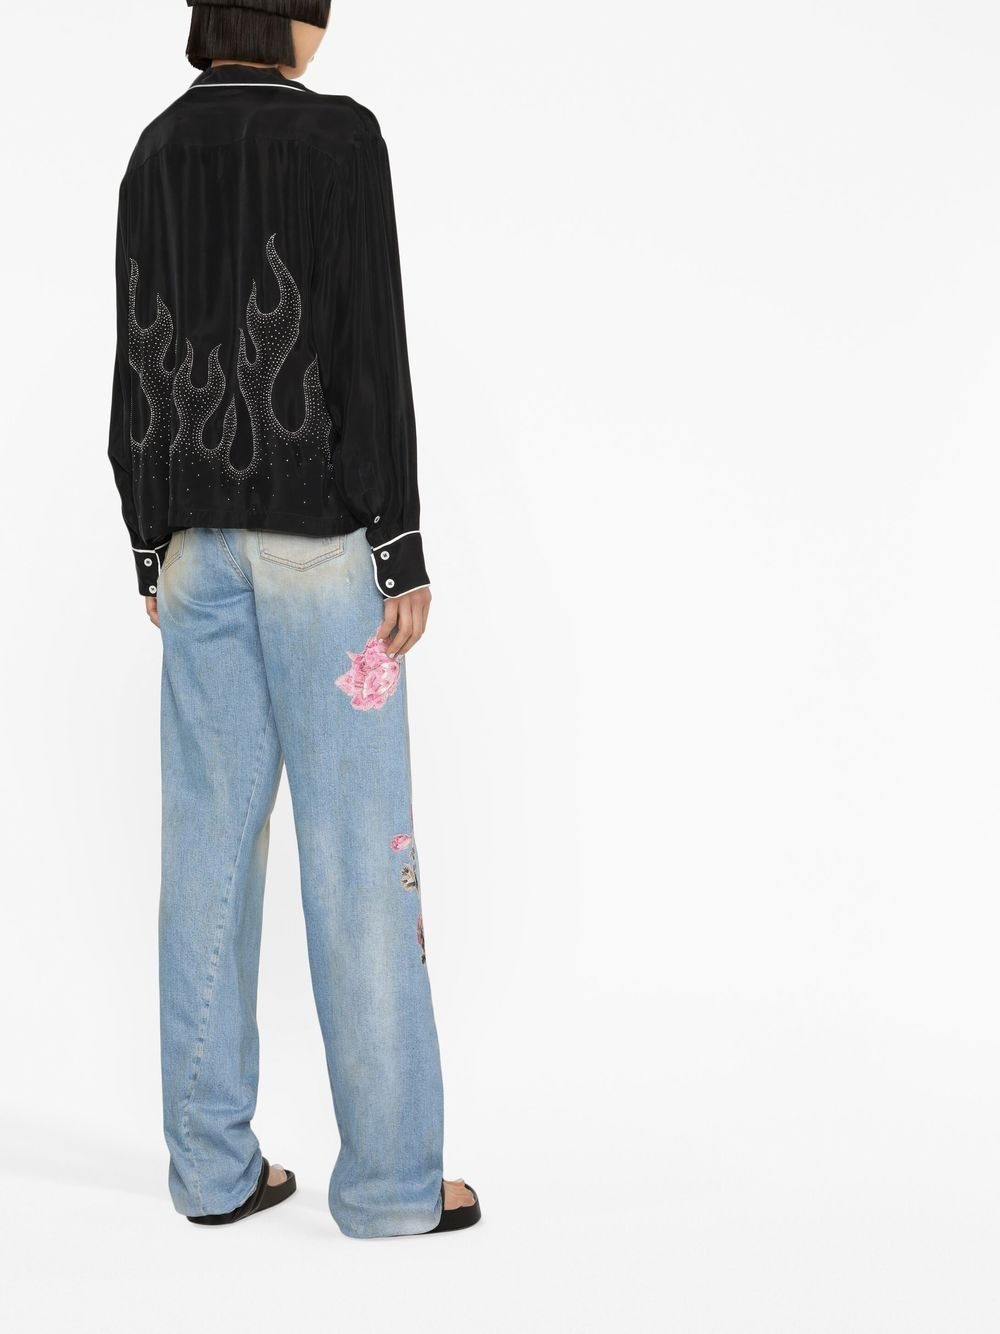 flame-embroidered shirt - 4